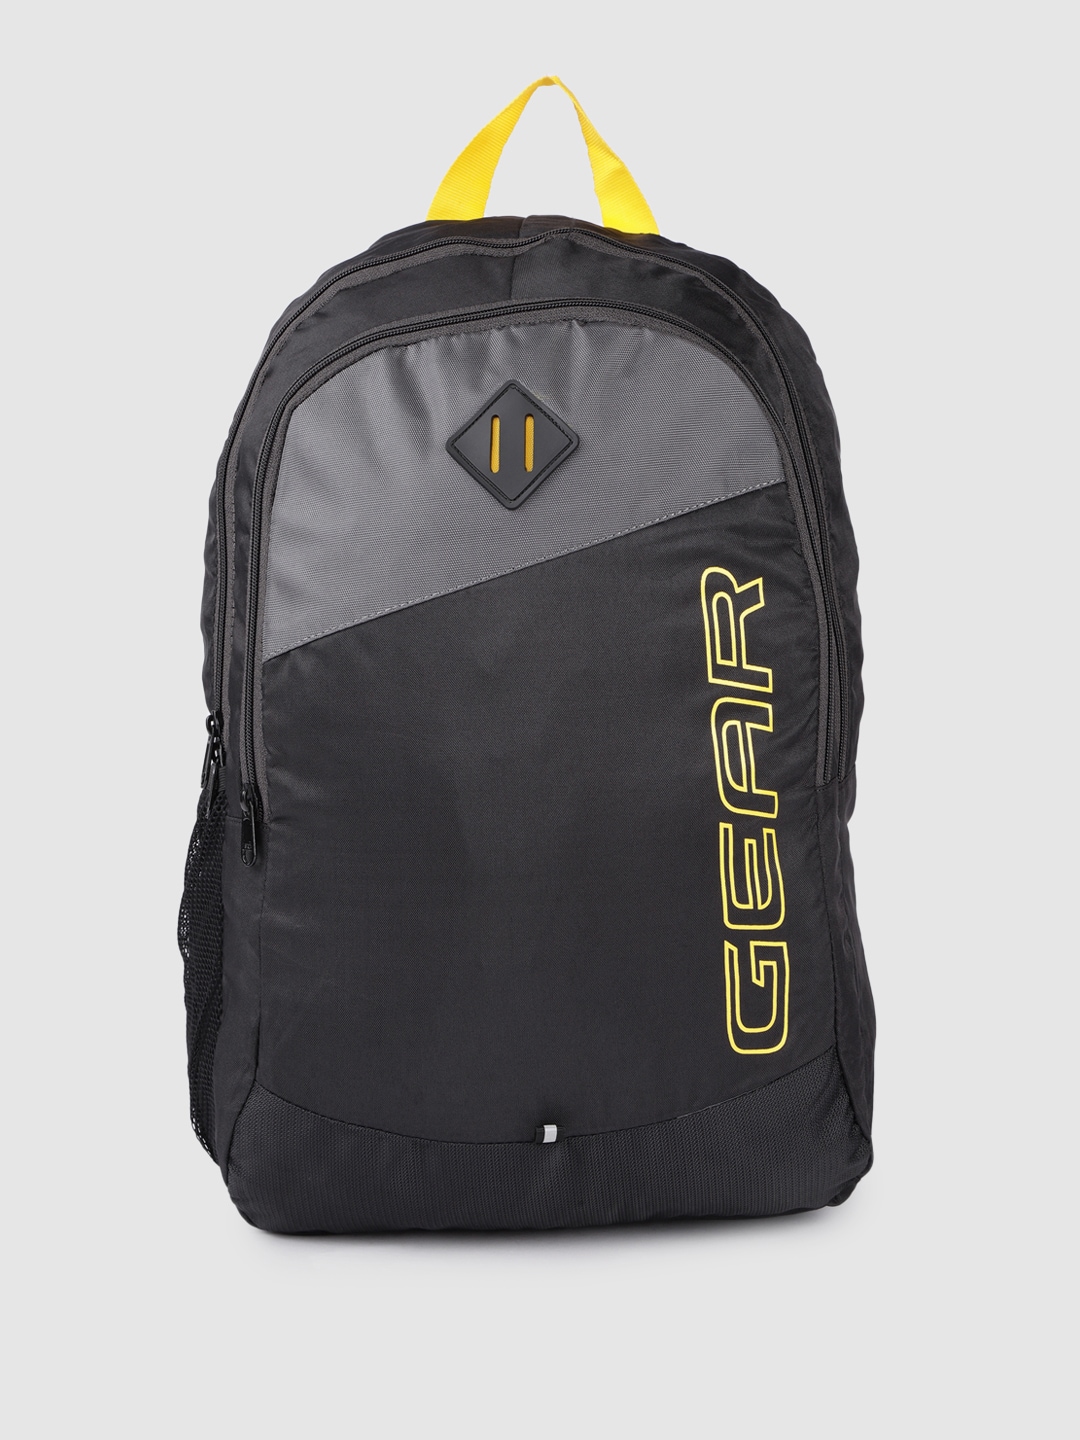 Gear Unisex Black & Grey MODERN ECO 5 Backpack Price in India